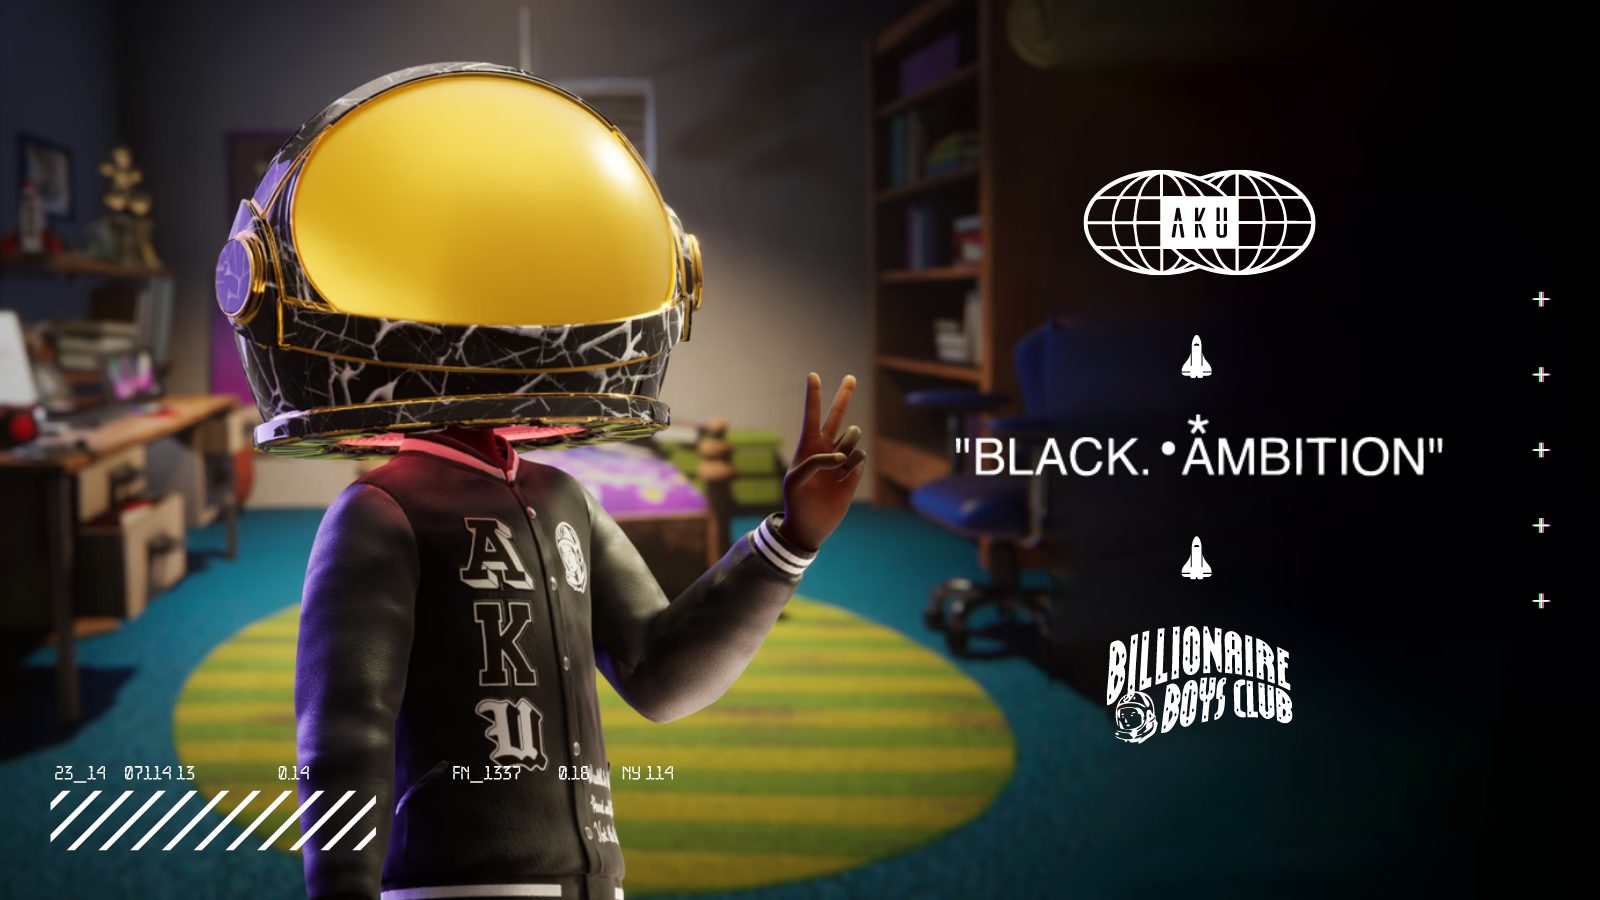 BLACK AMBITION, AKU AND BILLIONAIRE BOYS CLUB ANNOUNCE PARTNERSHIP TO EMPOWER BLACK AND LATINX ENTREPRENEURS IN WEB3